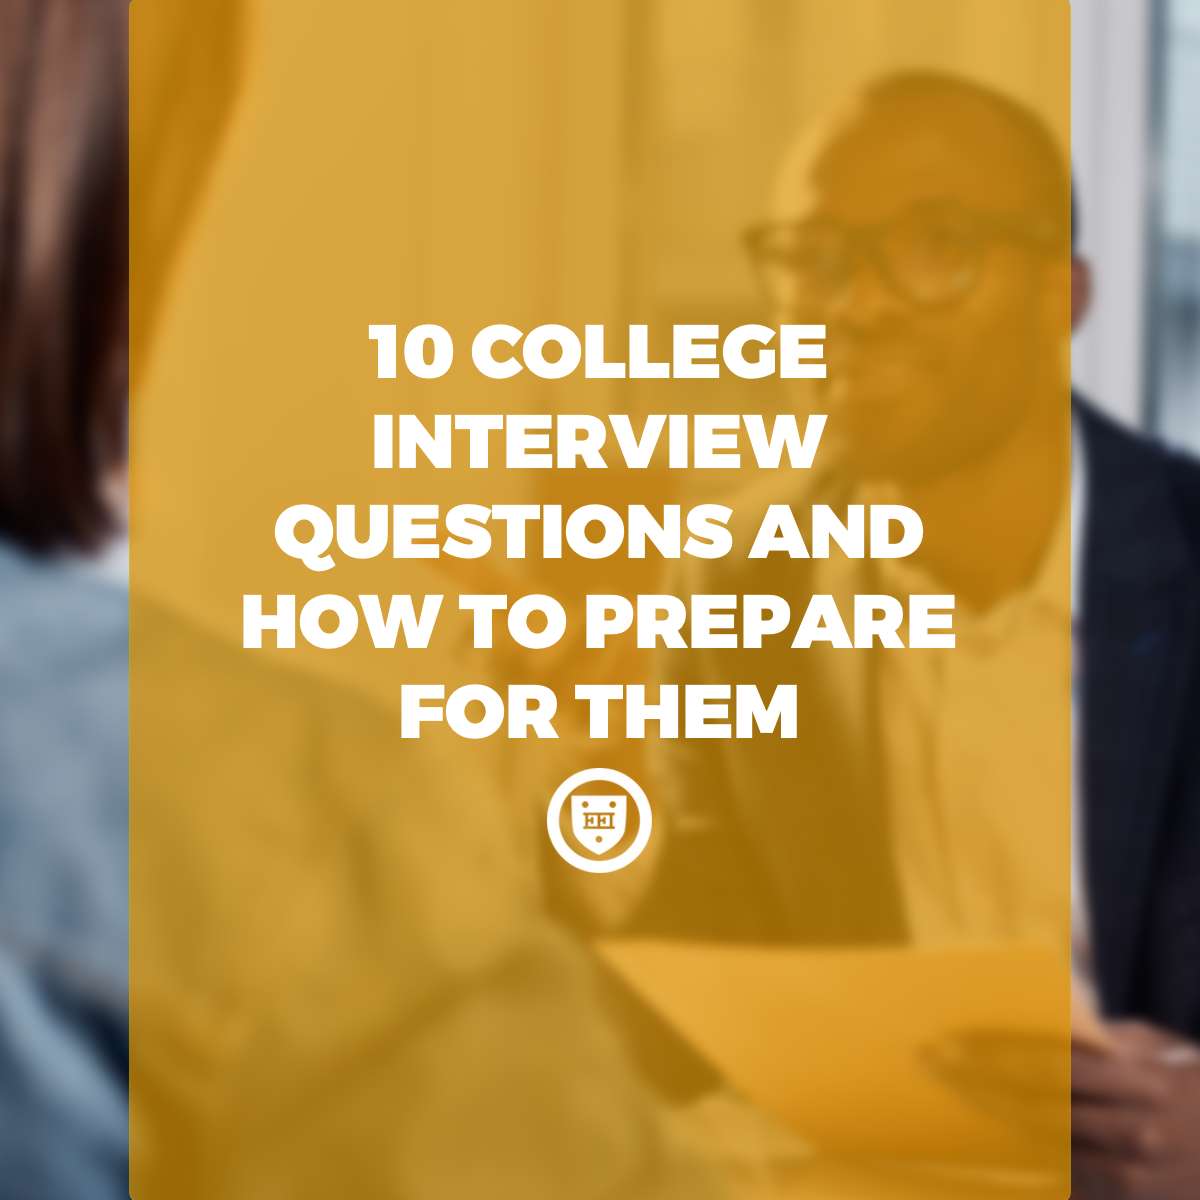 interview assignment for college students